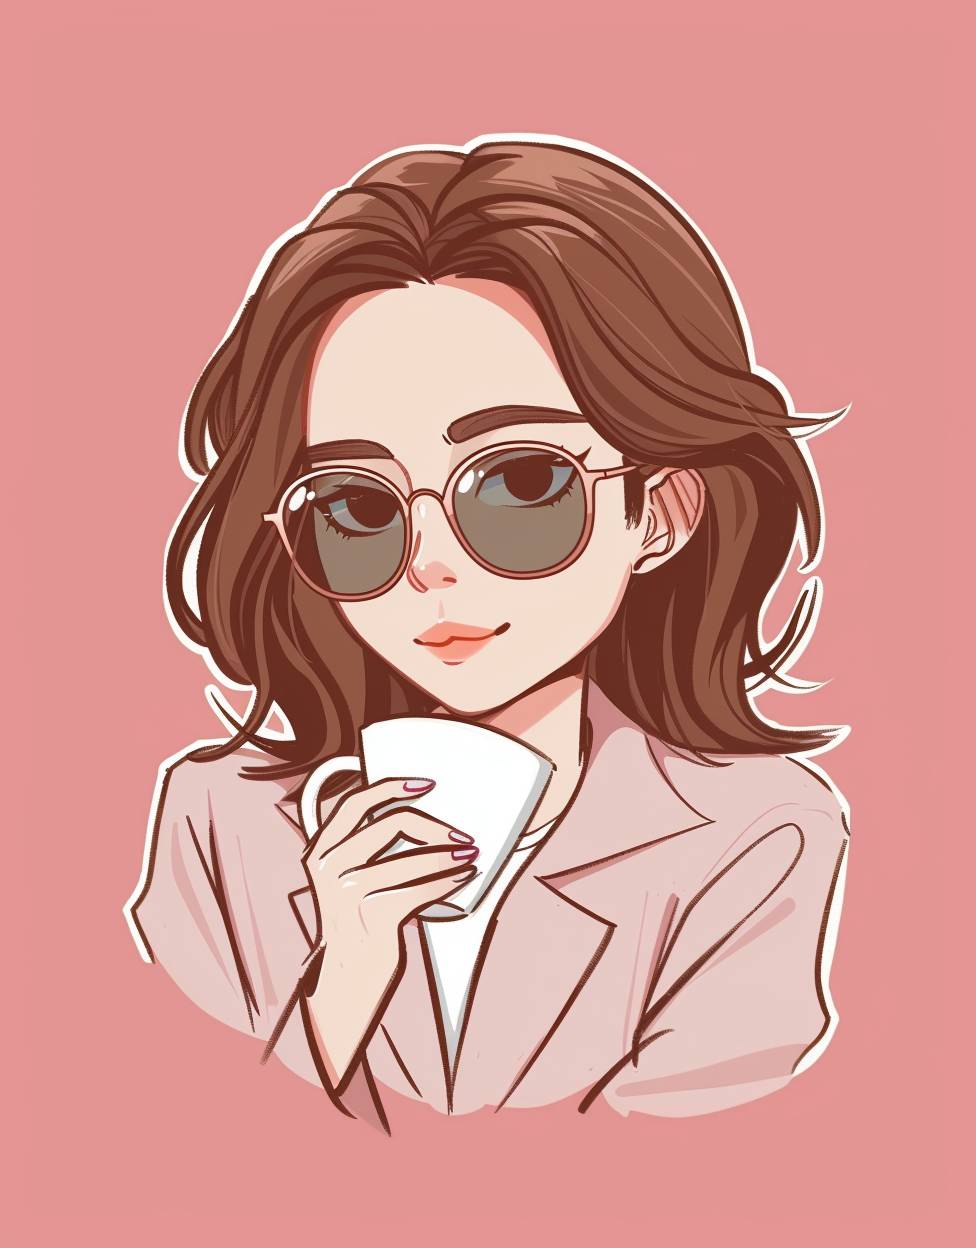 A cute female Asian lawyer with brown hair and pink, wearing sunglasses drinking coffee. She has an exaggerated expression while drinking tea. A simple cartoon style drawing with bright colors. The background color should be light red or pink, adding fun to the illustration. There is no other character in front of it, in the style of Quentin Blake.